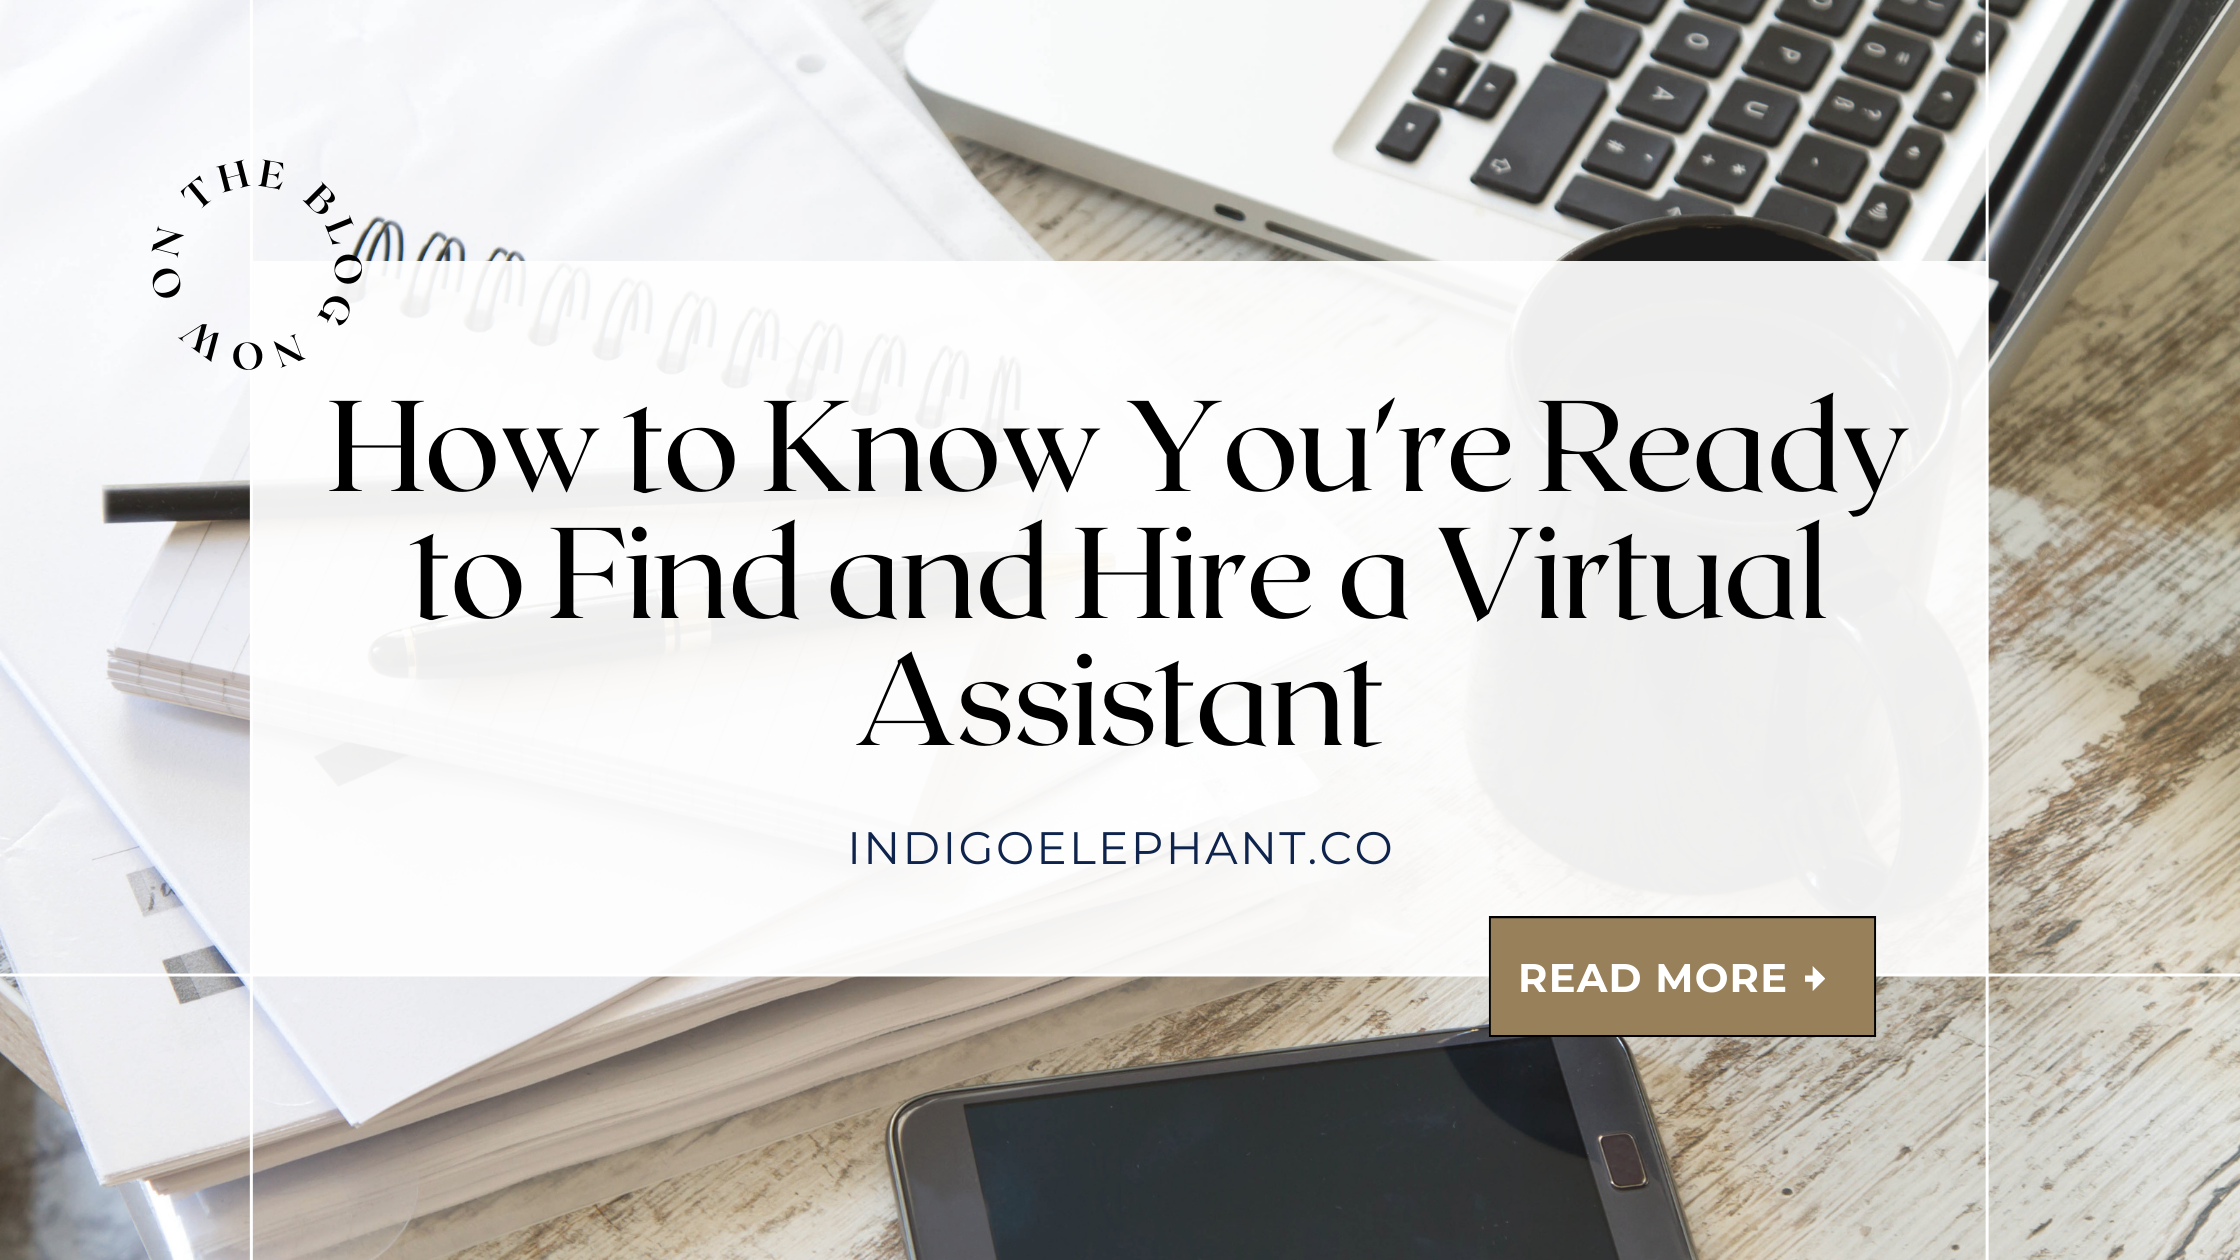 How to Know You’re Ready to Find and Hire a Virtual Assistant